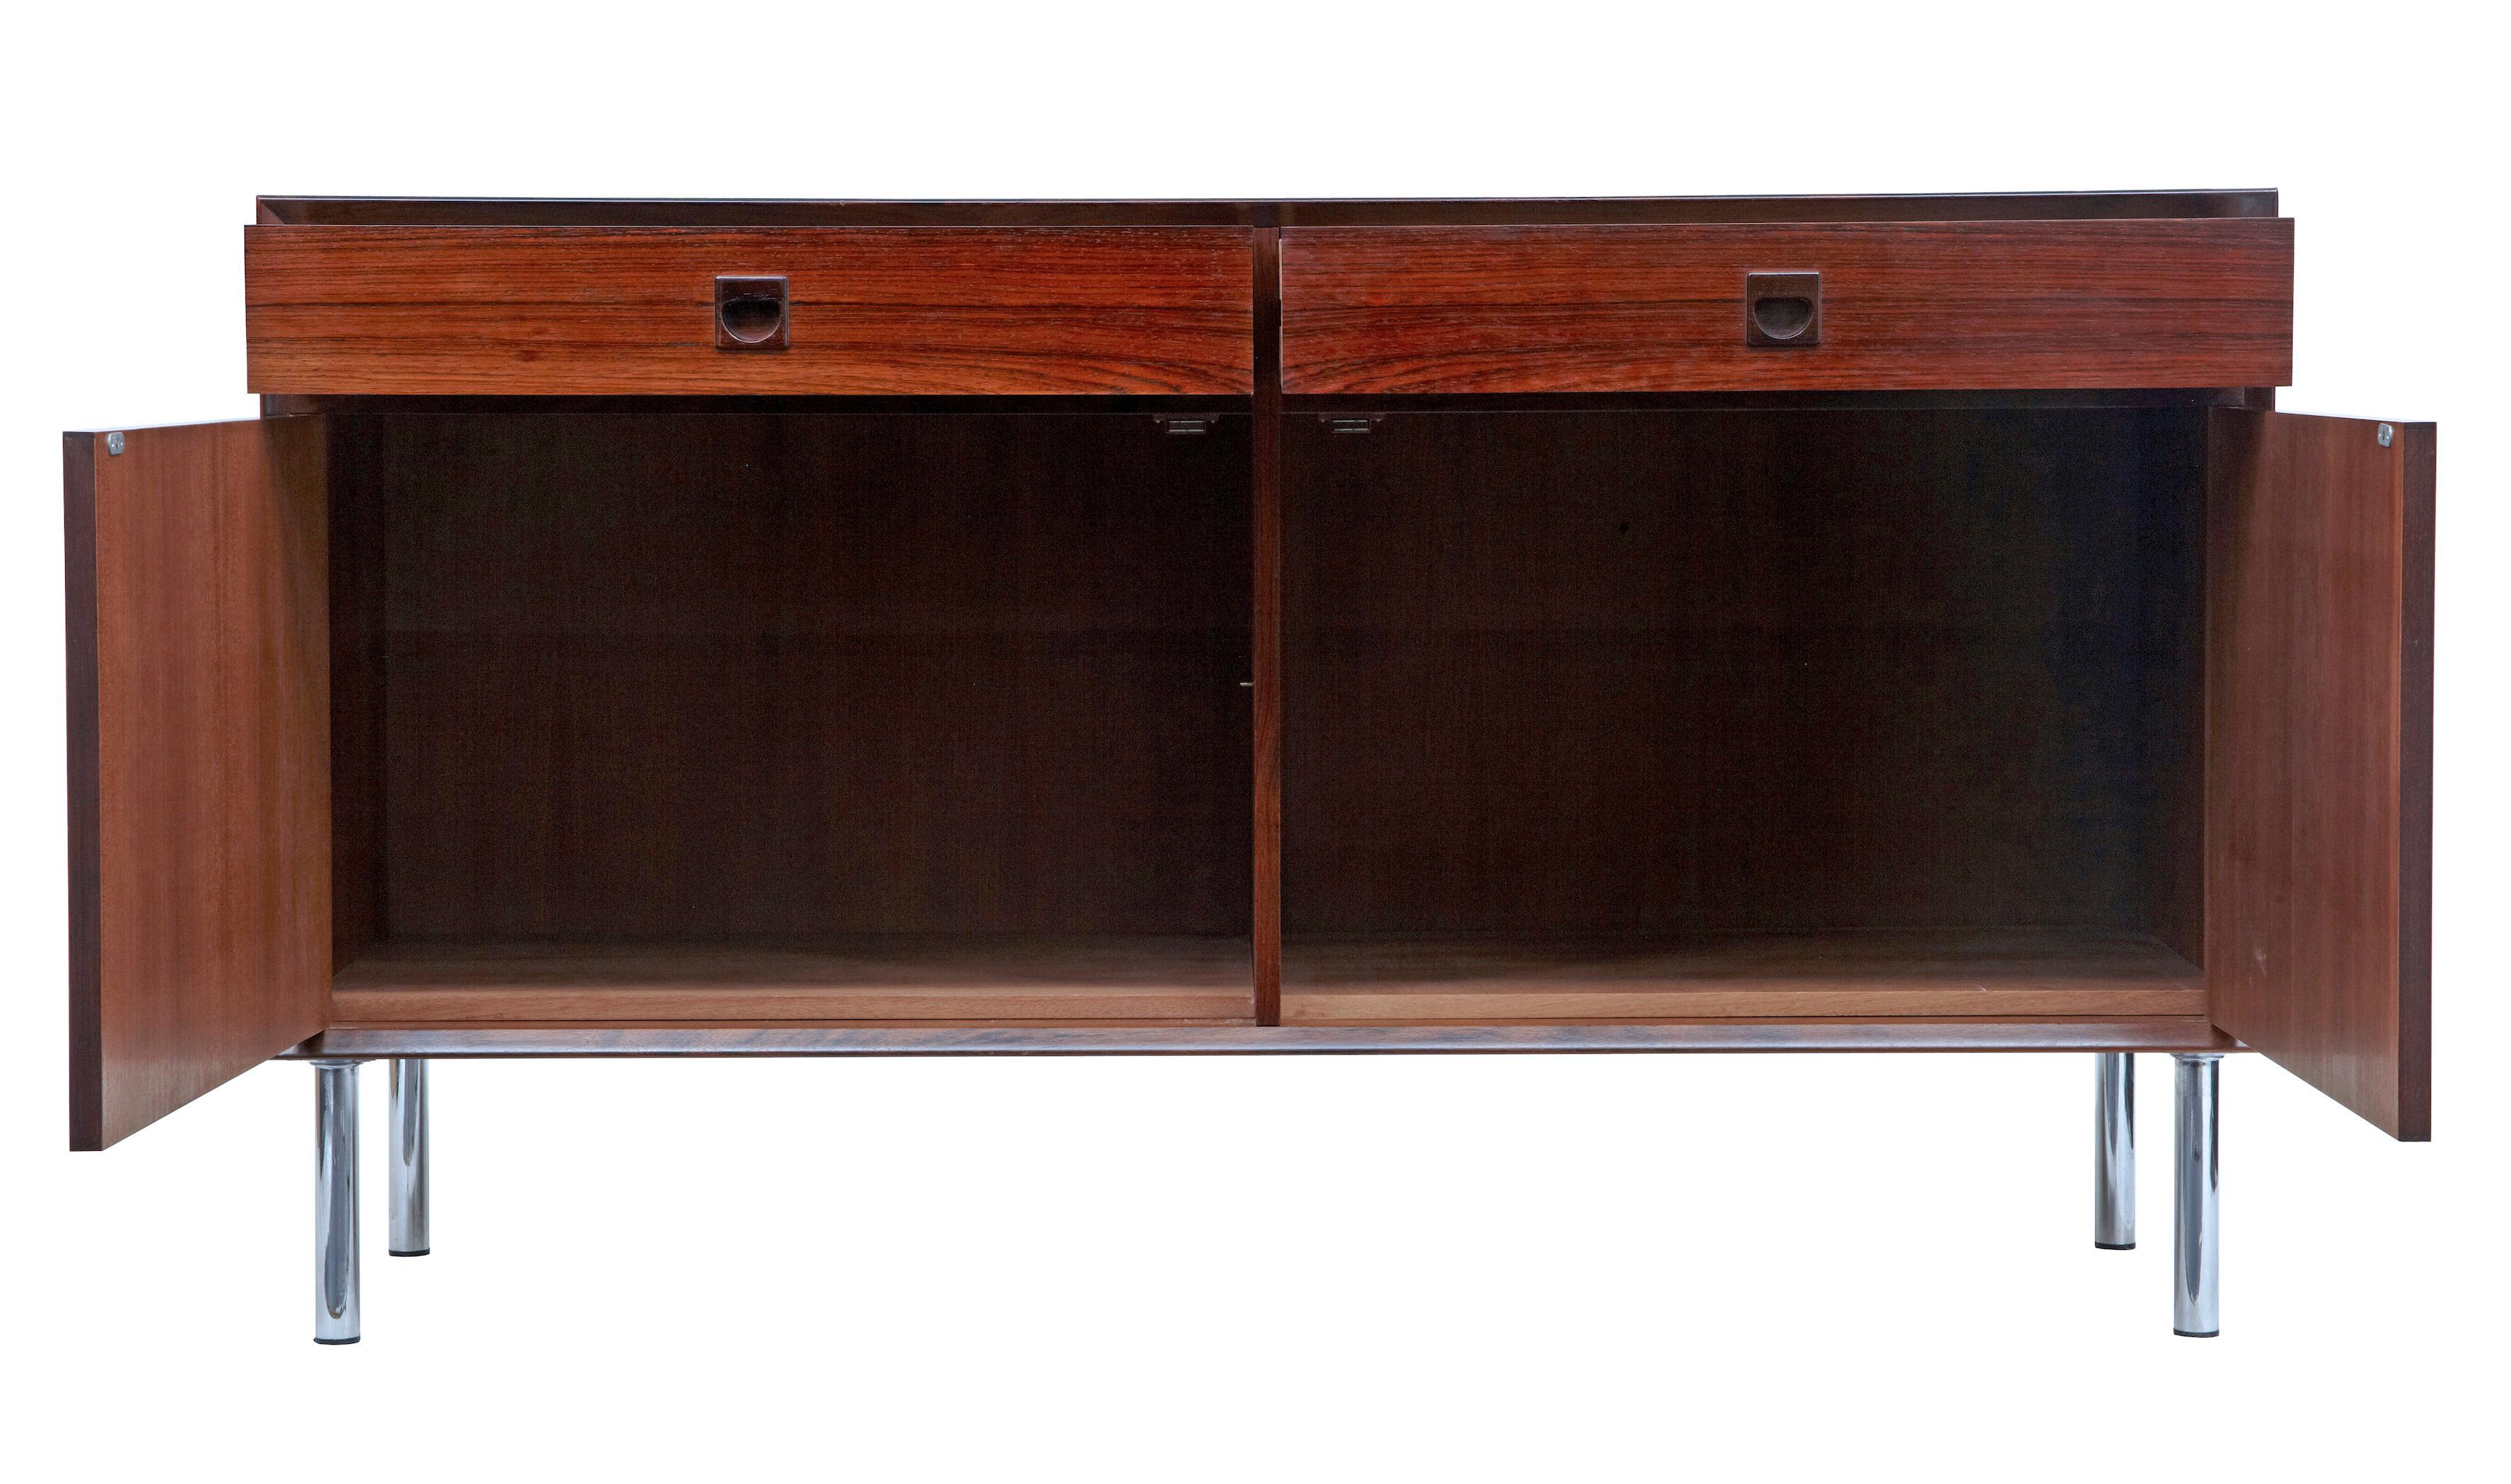 1960s Danish palisander buffet sideboard.

Good quality palisander veneers used on this sideboard. 2 drawers below the top surface with solid inset handles. Double door cabinet below opens to interior which would have housed 2 shelves. Standing on